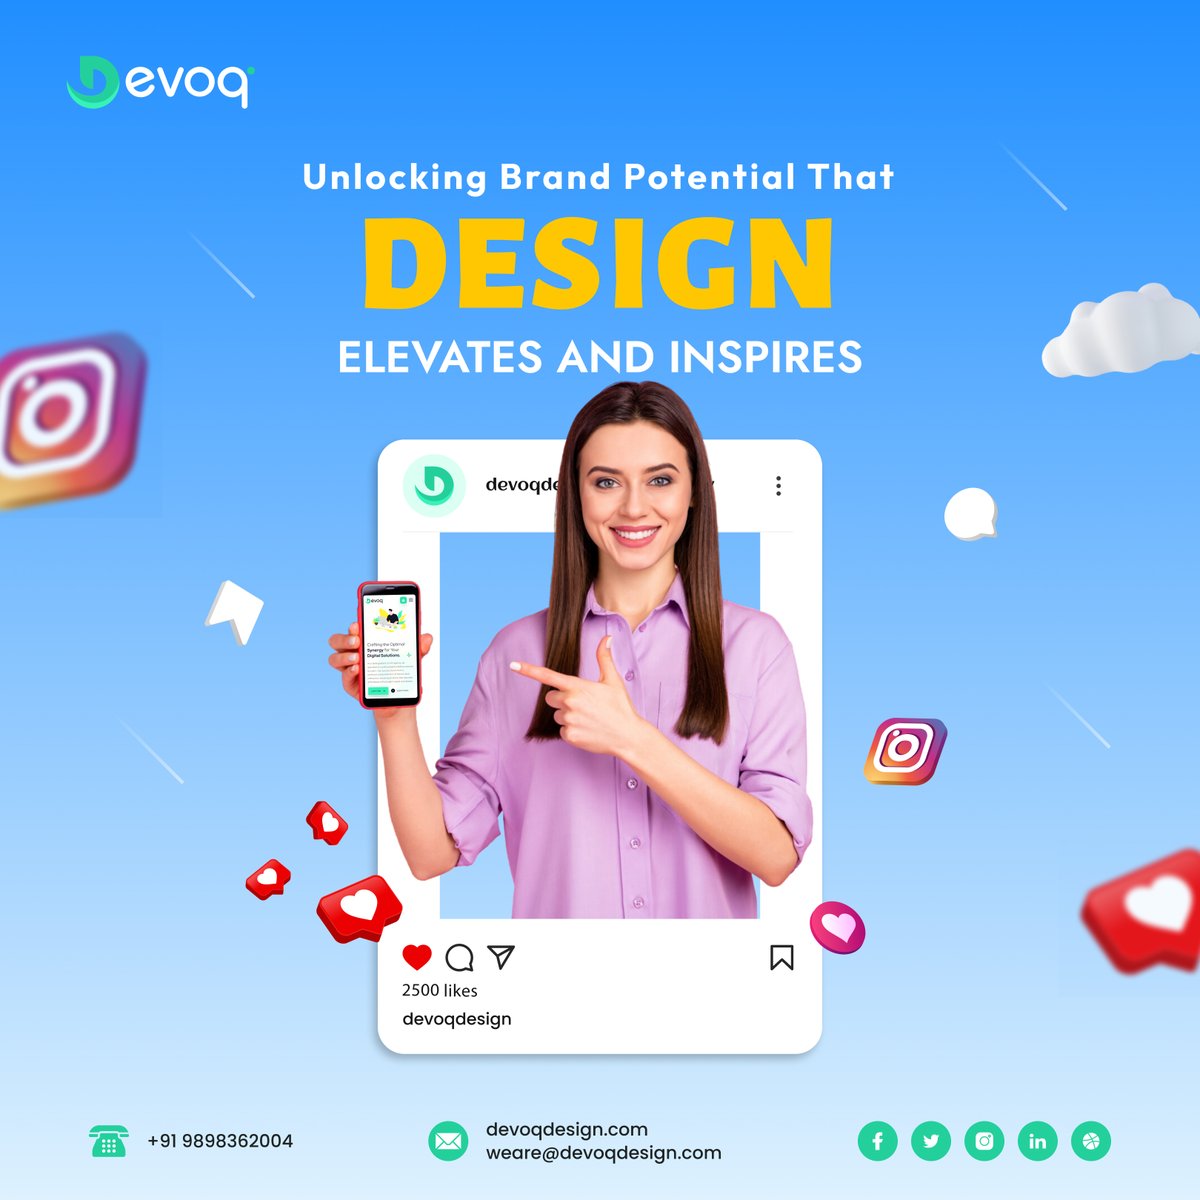 Your brand deserves a design that inspires. We craft digital experiences that resonate with your audience. Visit our website for more details: devoqdesign.com Email Us: sales@devoqdesign.com #UIUX #UXUI #UIUXDesign #UXUIDesign #UserExperience #experiencematters